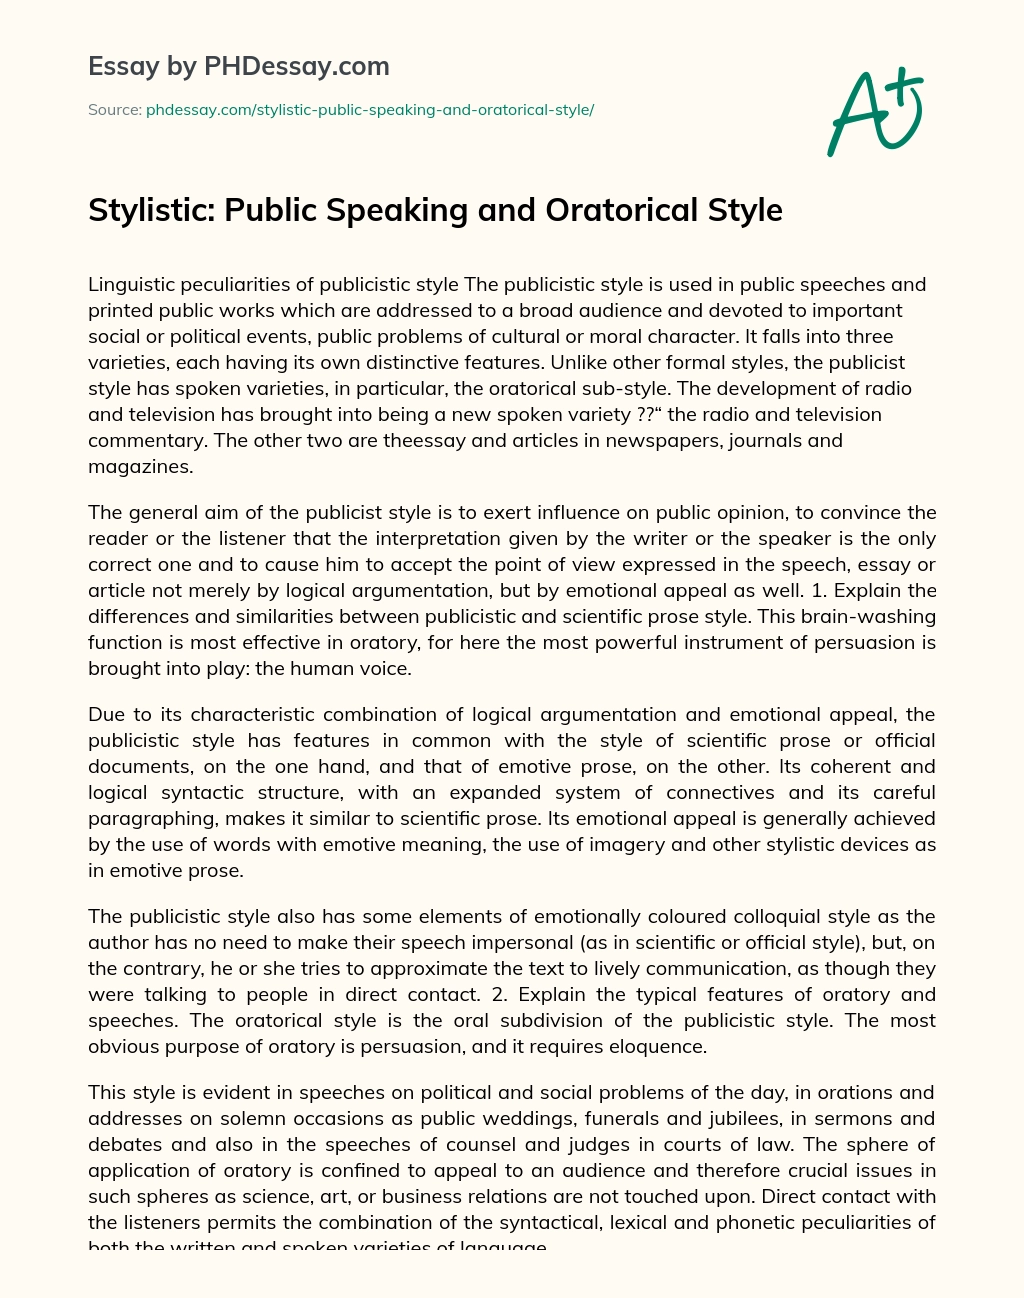 Stylistic: Public Speaking and Oratorical Style essay